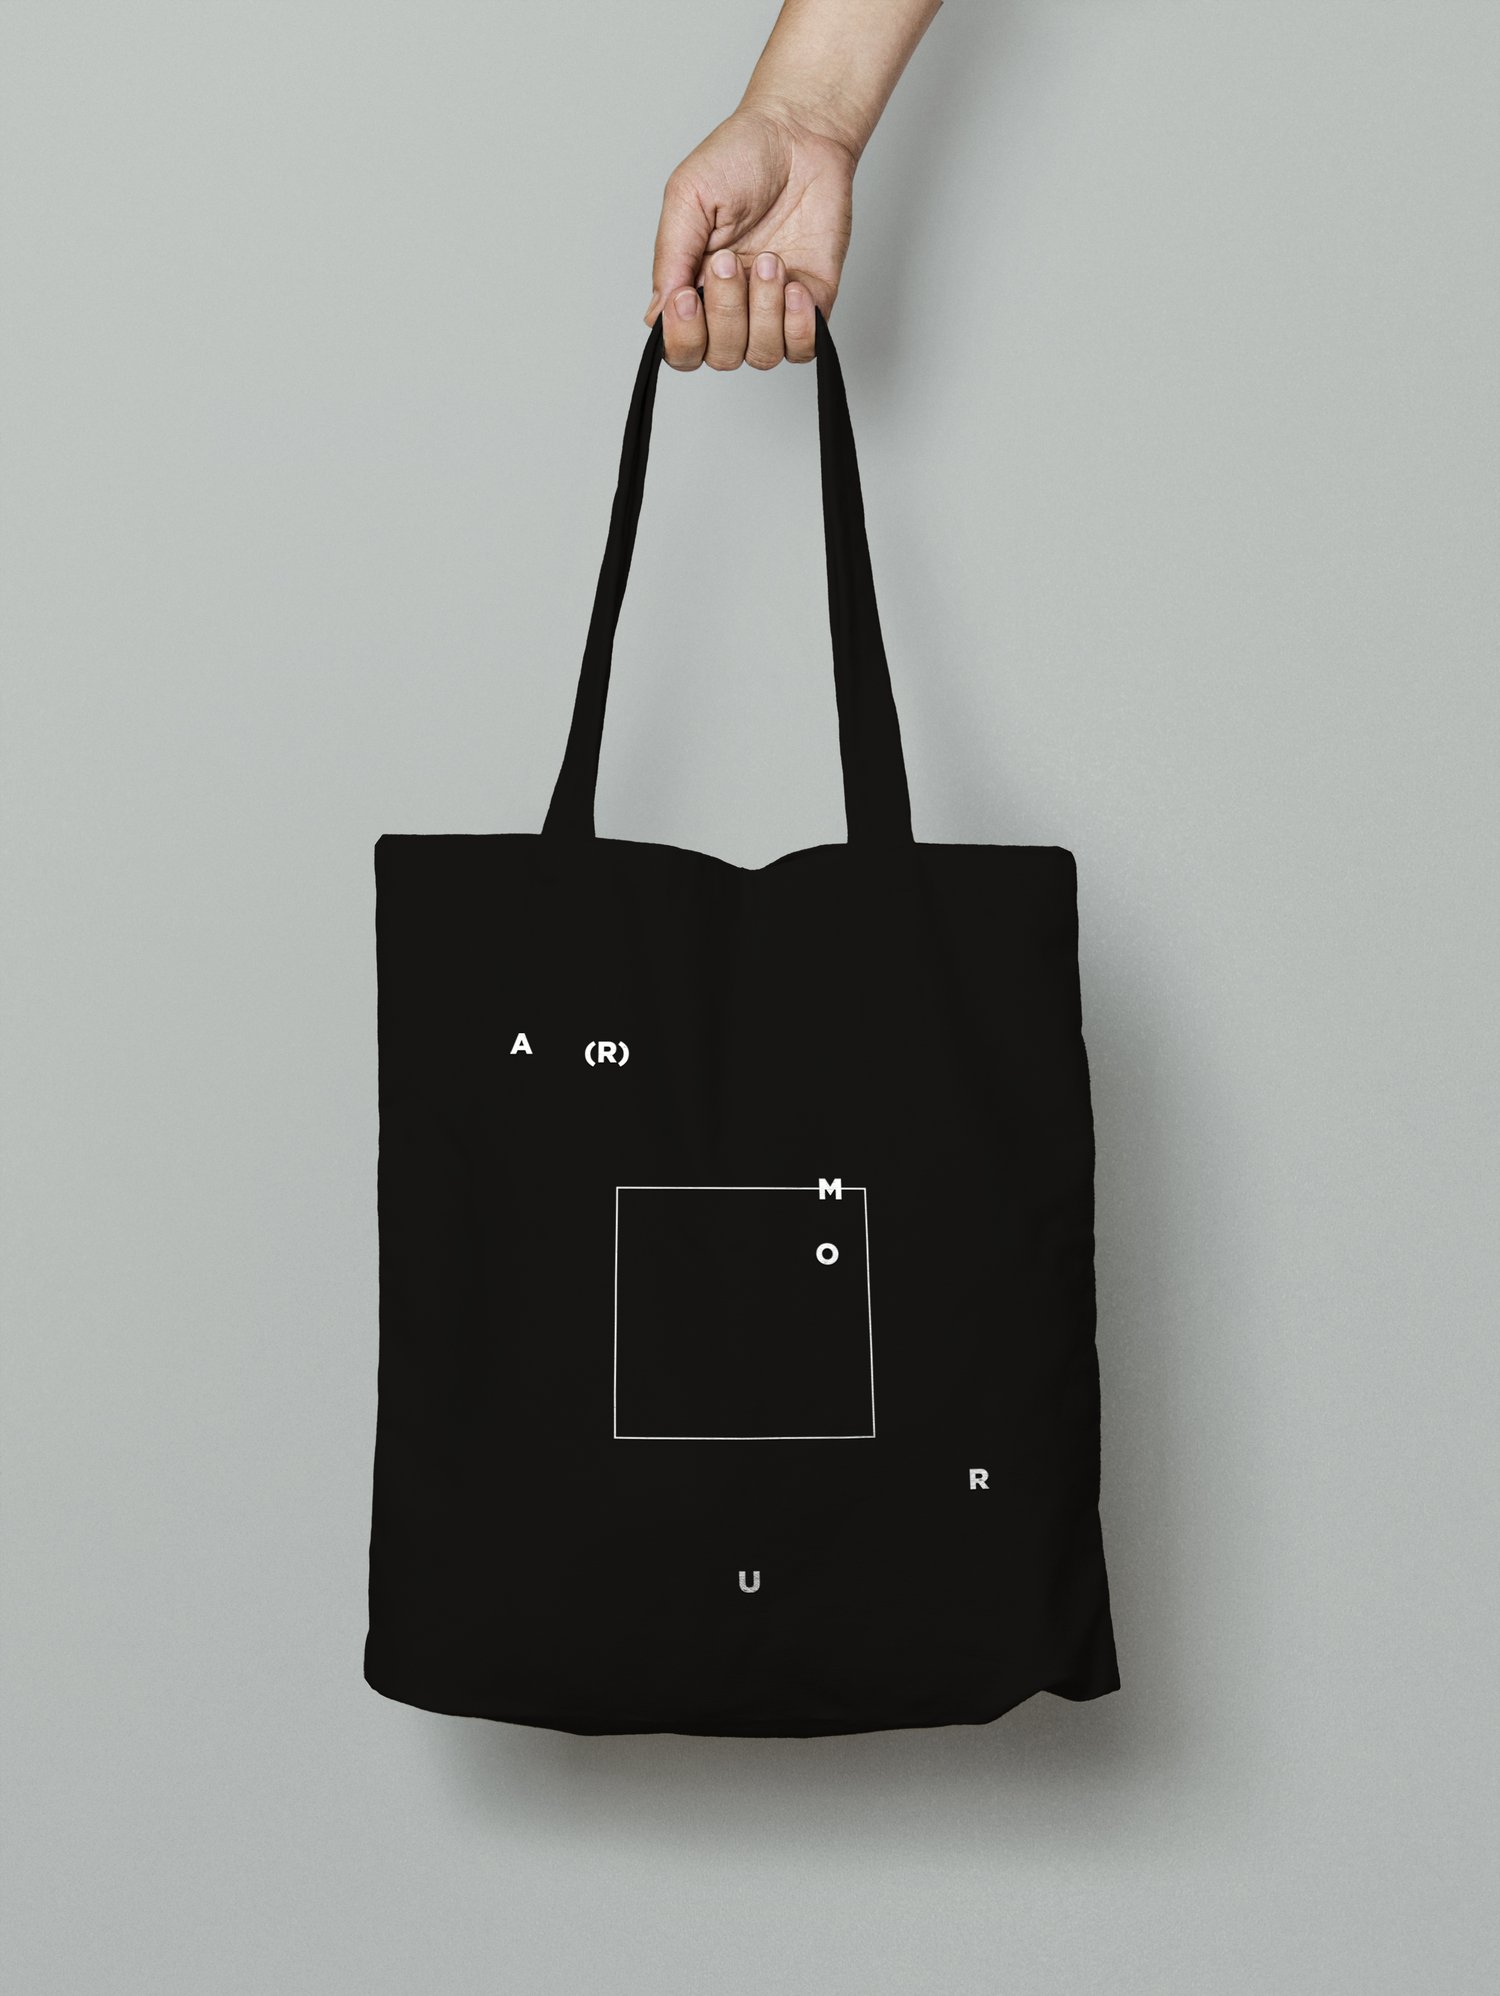 Image of Tote bag A(r)mour black